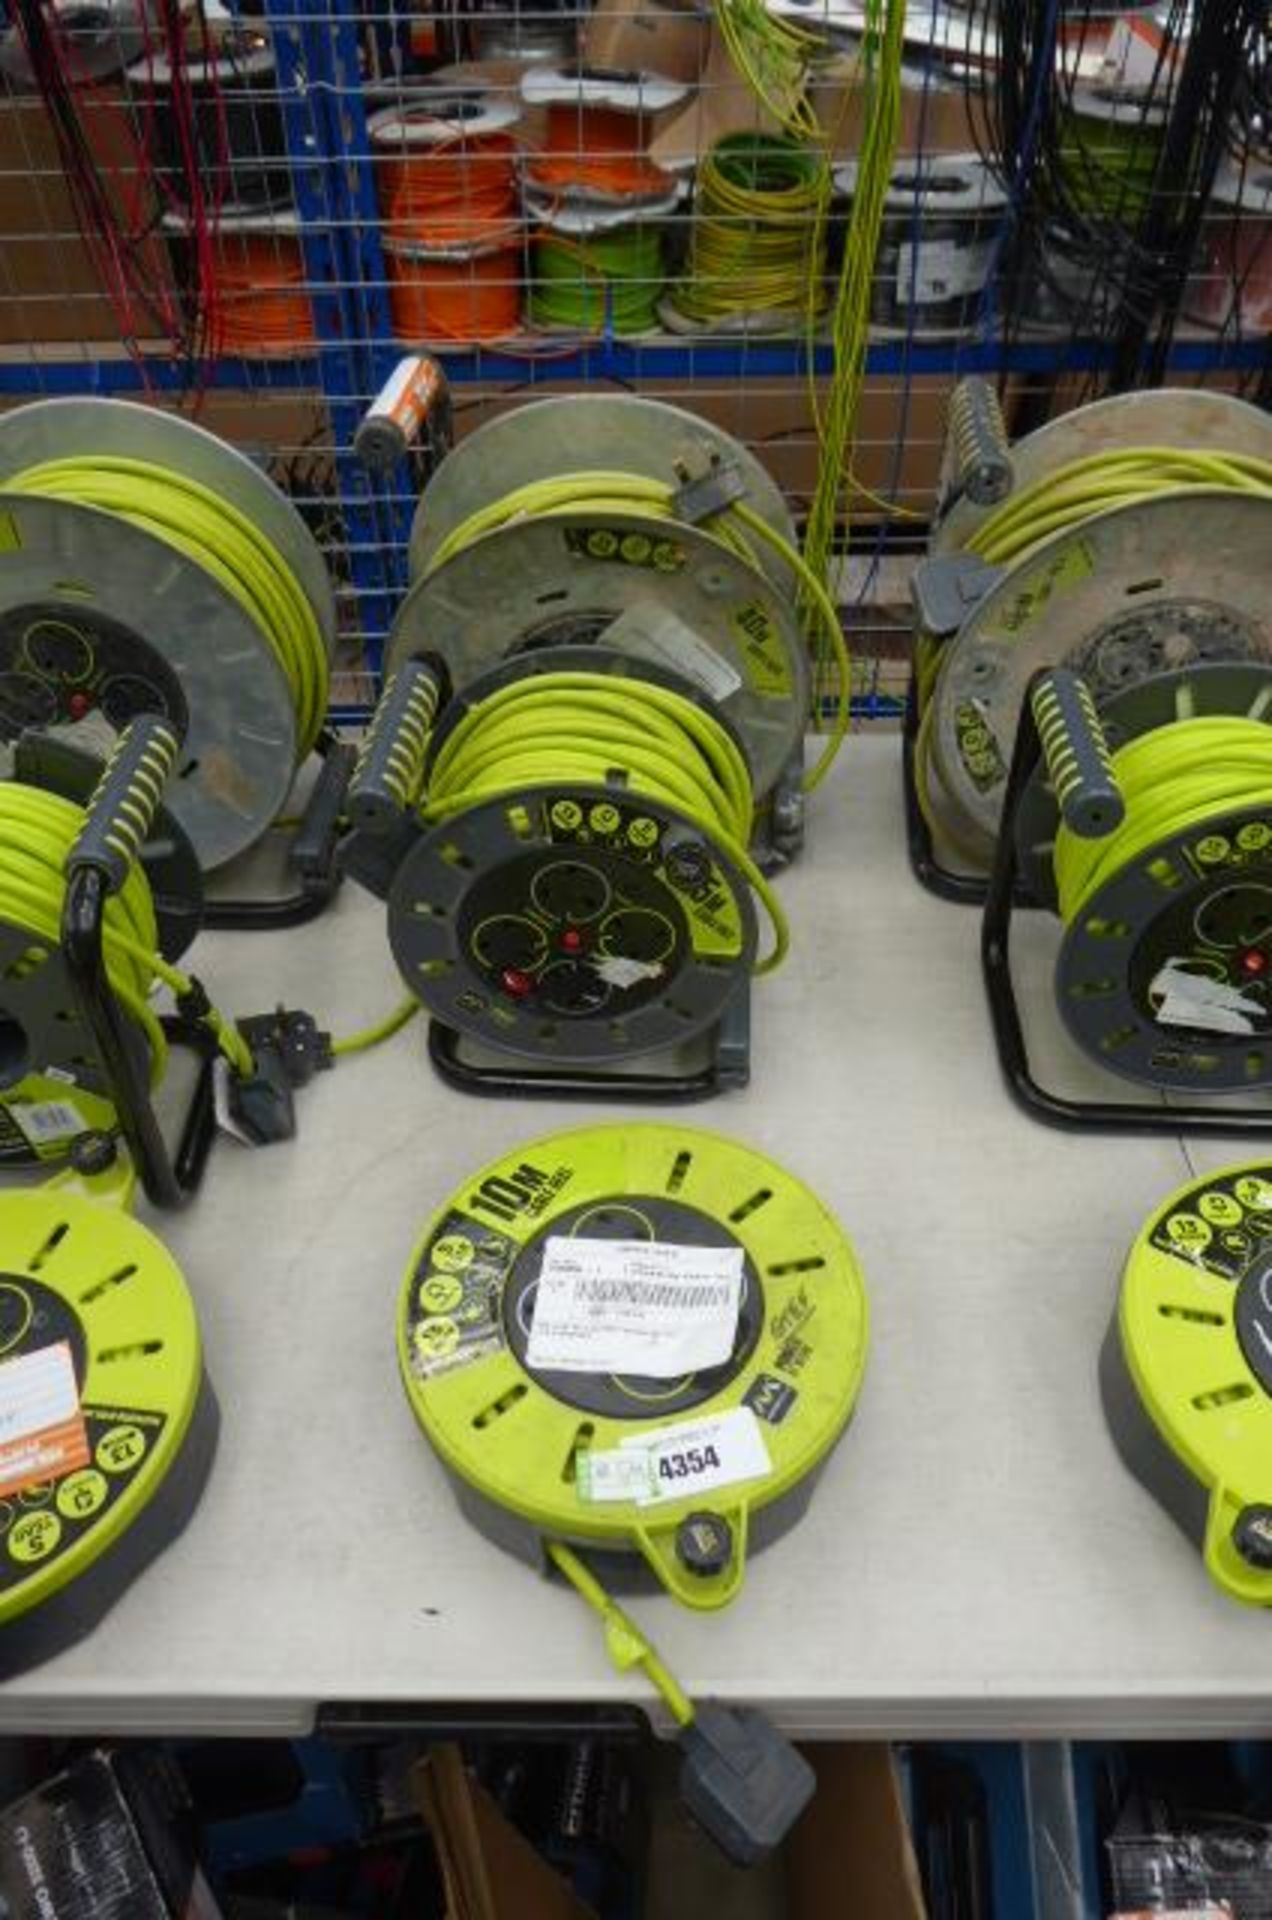 3 cable reels (1 large, 1 medium, 1 small)